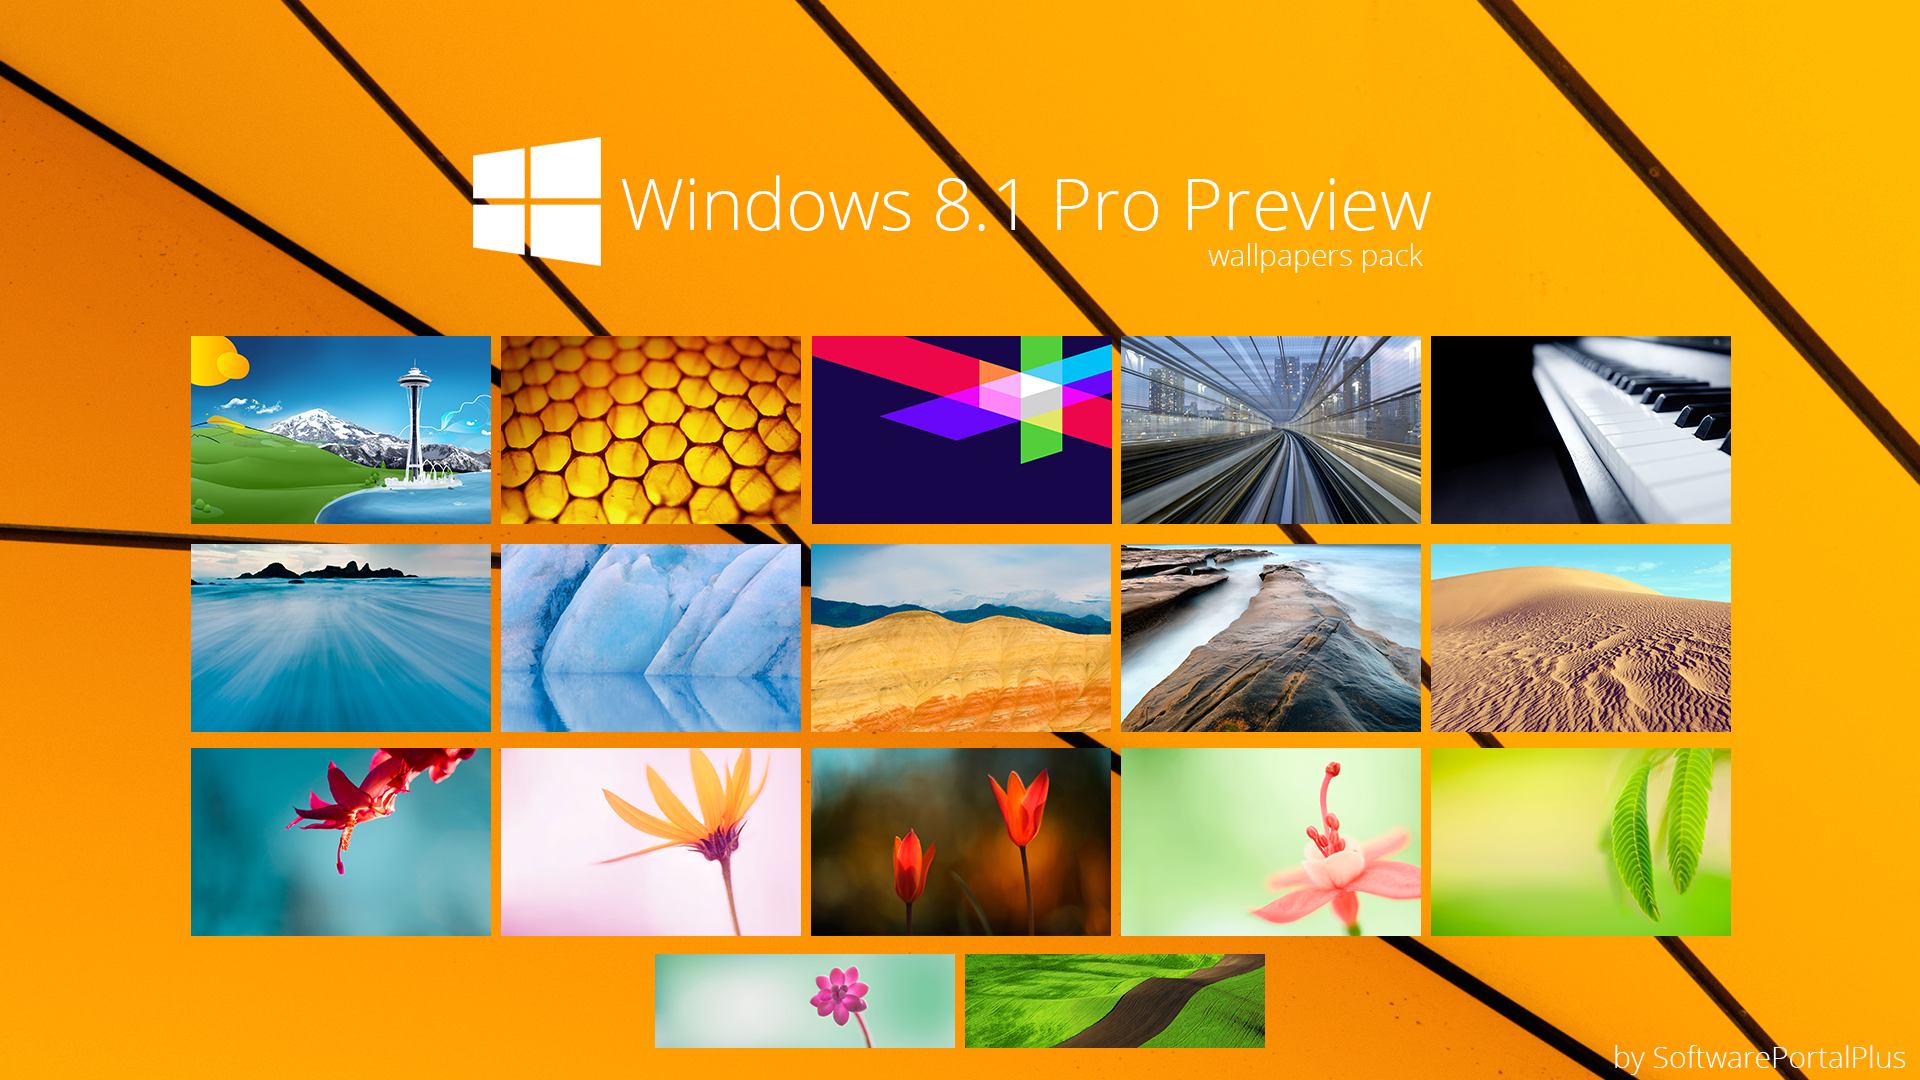 DeviantArt: More Like Windows 8.1 Pro Proview : Wallpapers Pack by ...